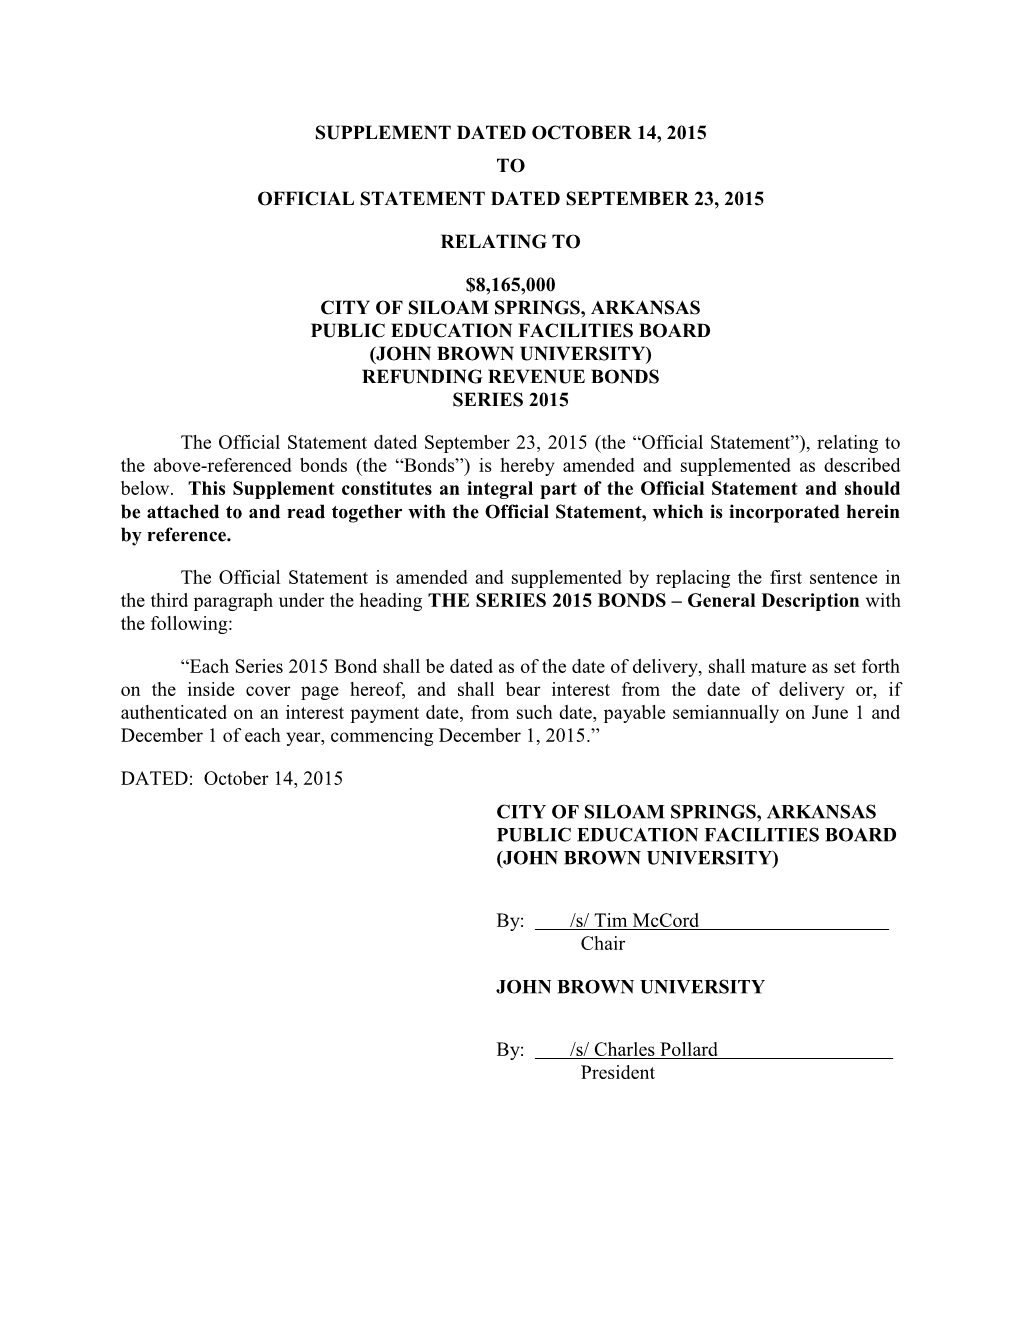 Supplement Dated October 14, 2015 to Official Statement Dated September 23, 2015